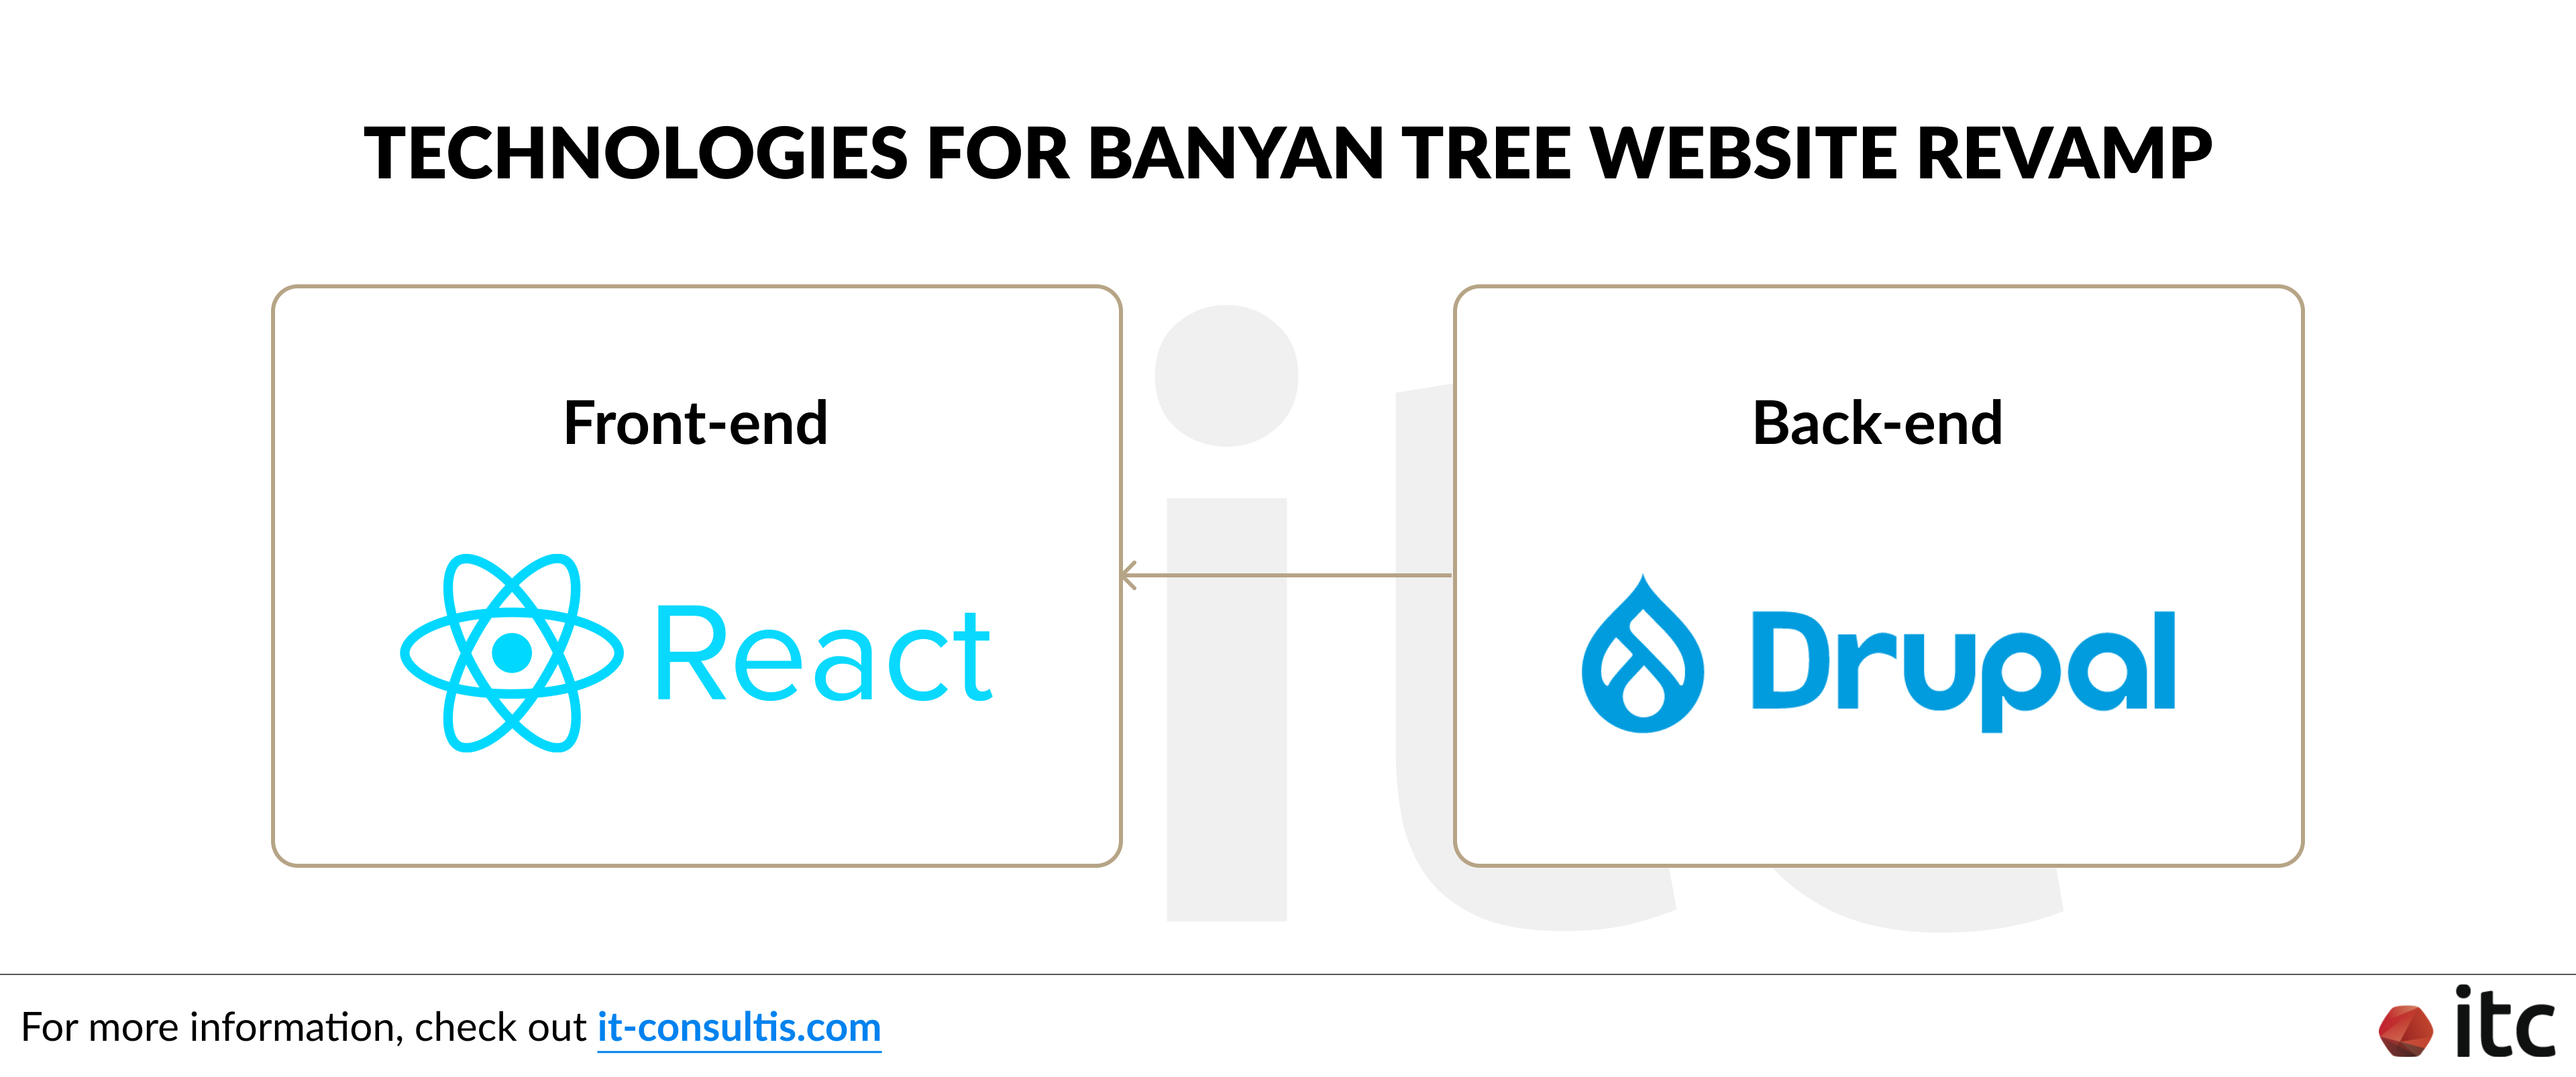 Technologies for Banyan Tree website revamp includes React for the Front-end and Drupal for the Back-end